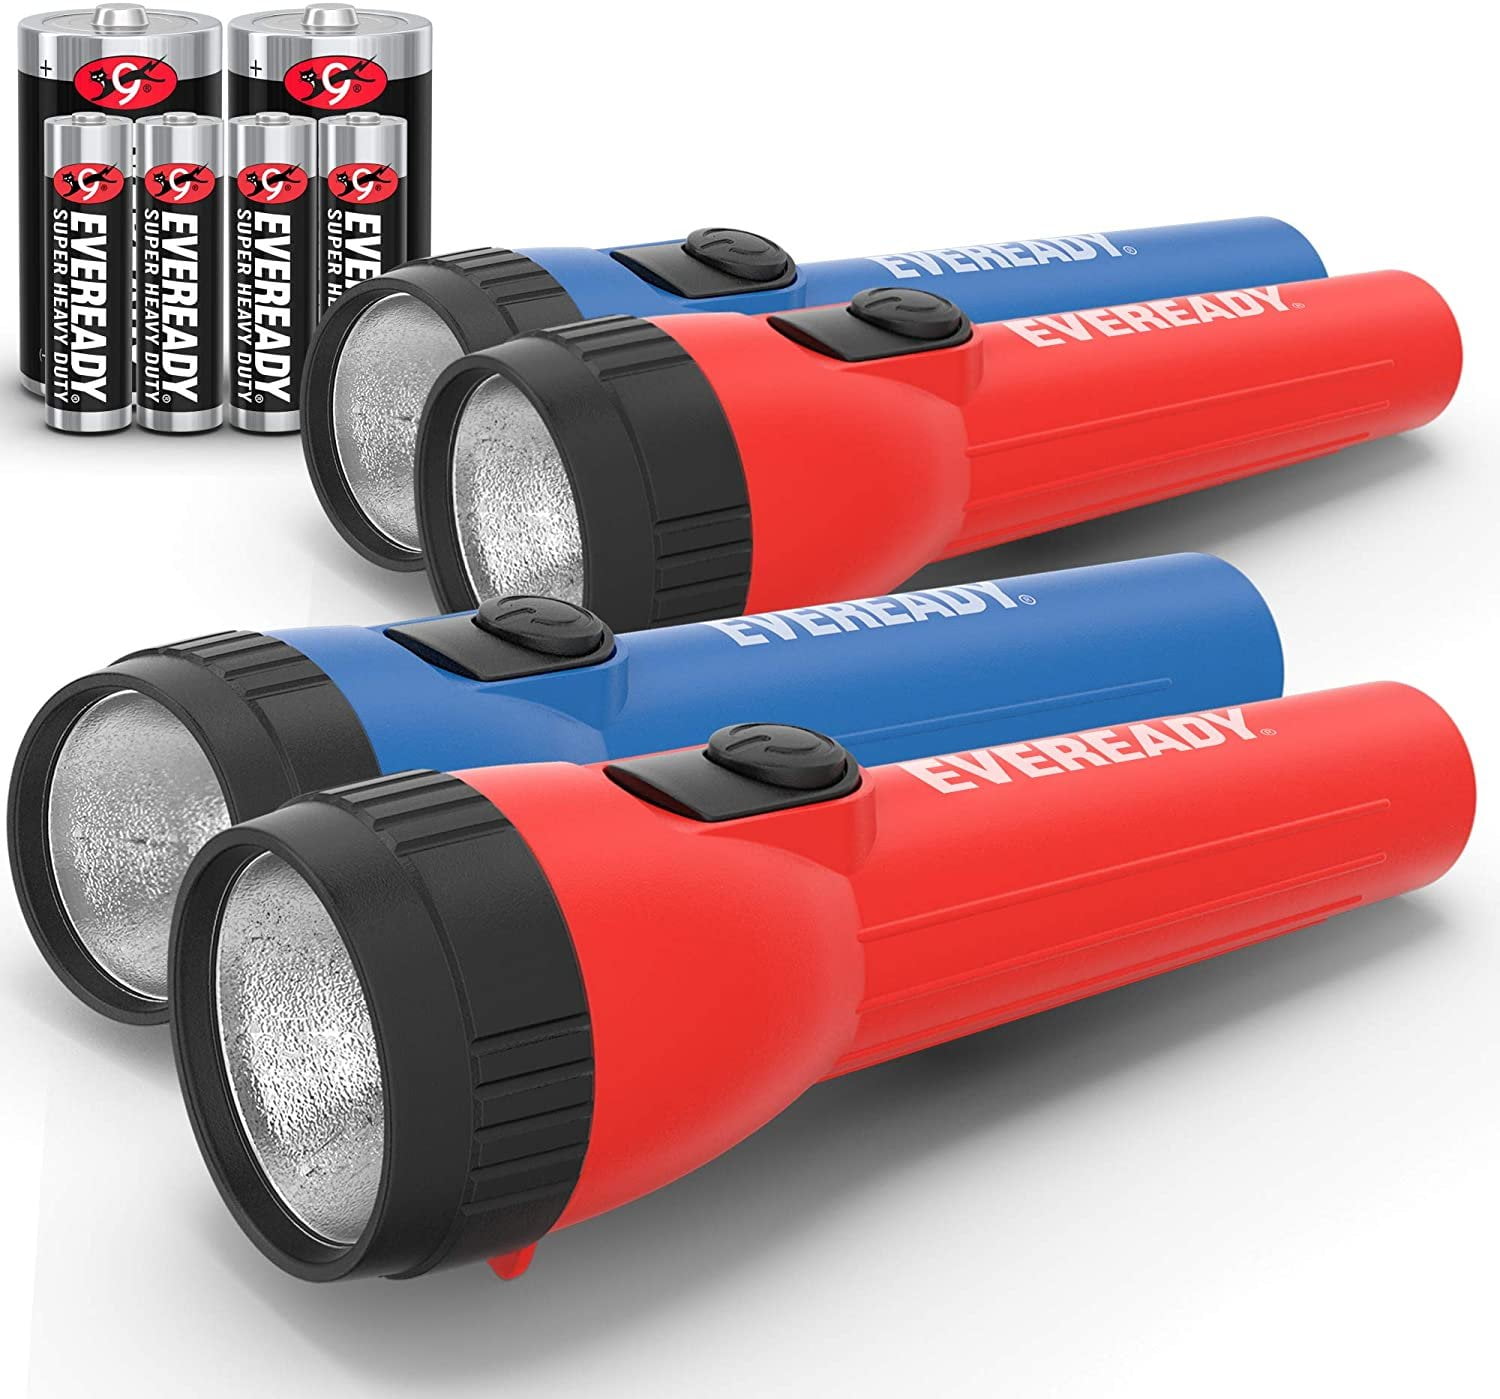 Eveready Led Flashlight Multi Pack, What Is The Brightest Led Bulb For Flashlights